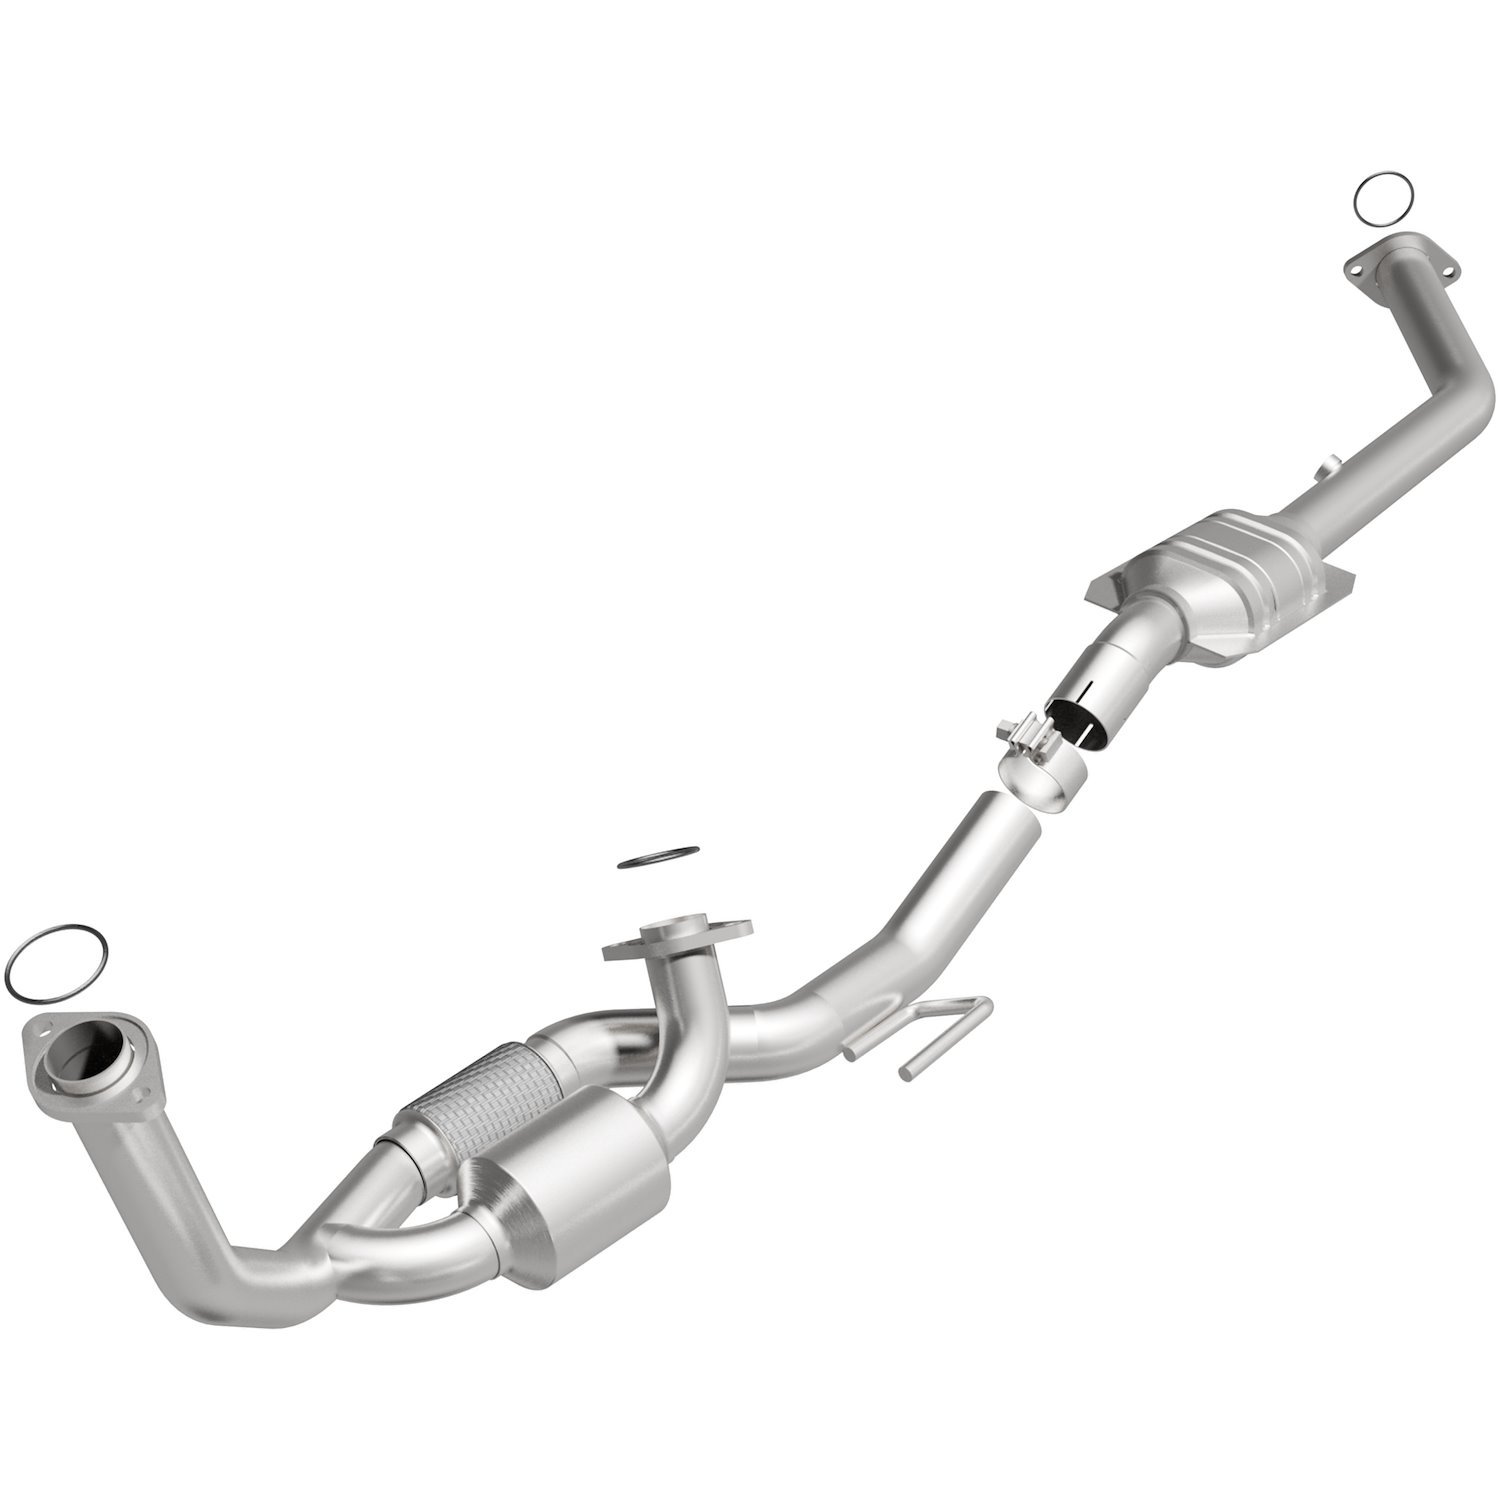 1999-2000 Toyota Sienna California Grade CARB Compliant Direct-Fit Catalytic Converter